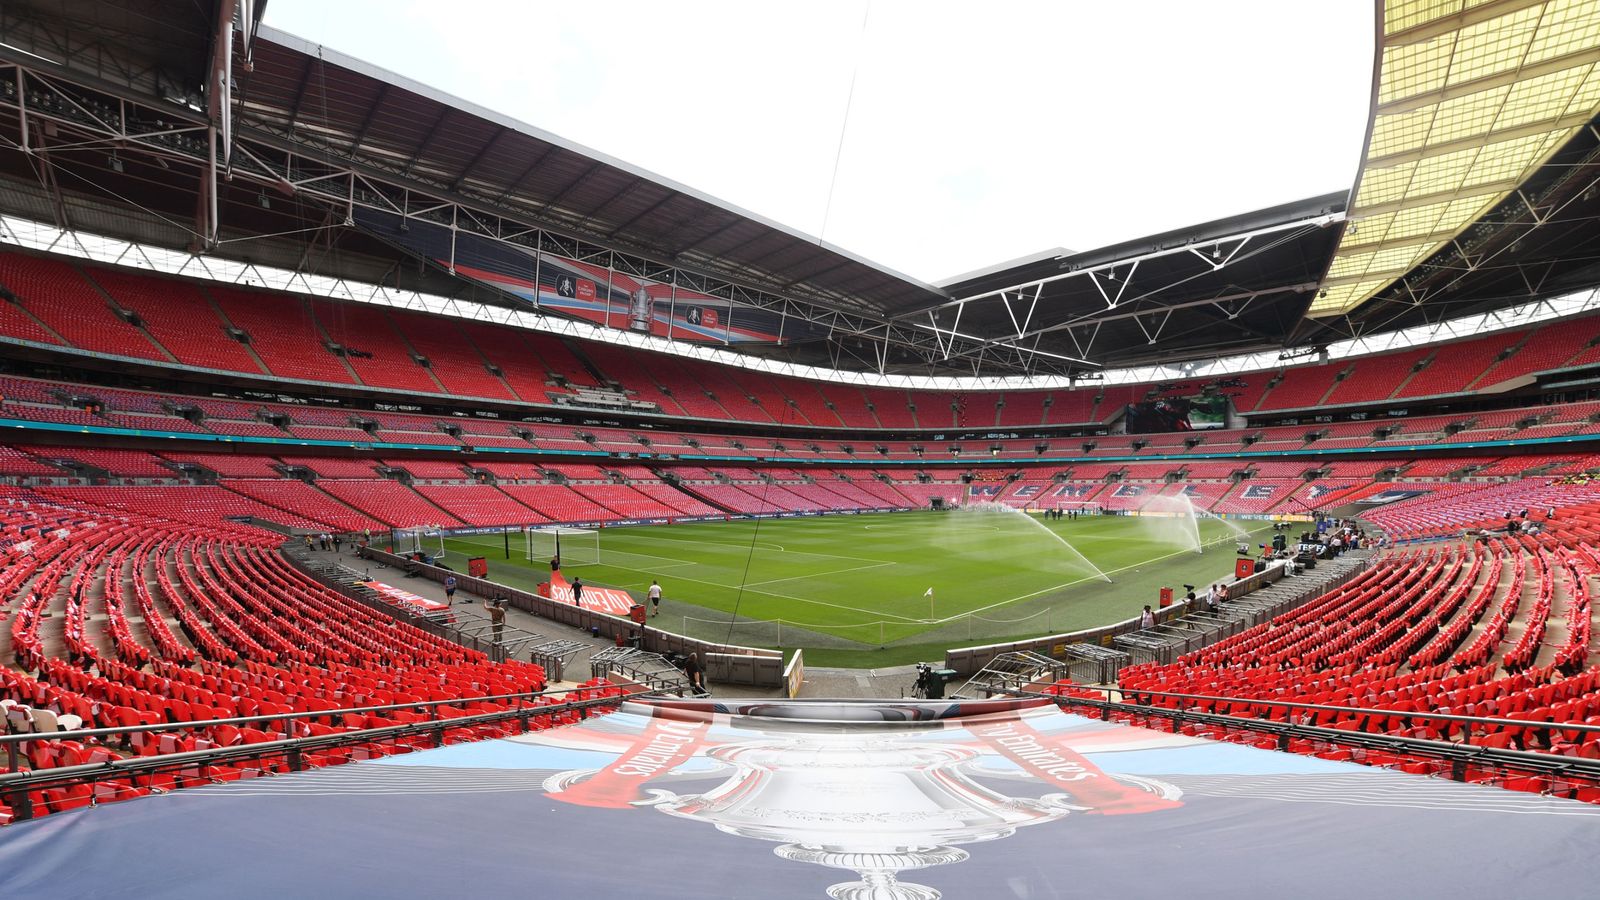 DCMS announces July evidence session to discuss Wembley Stadium sale